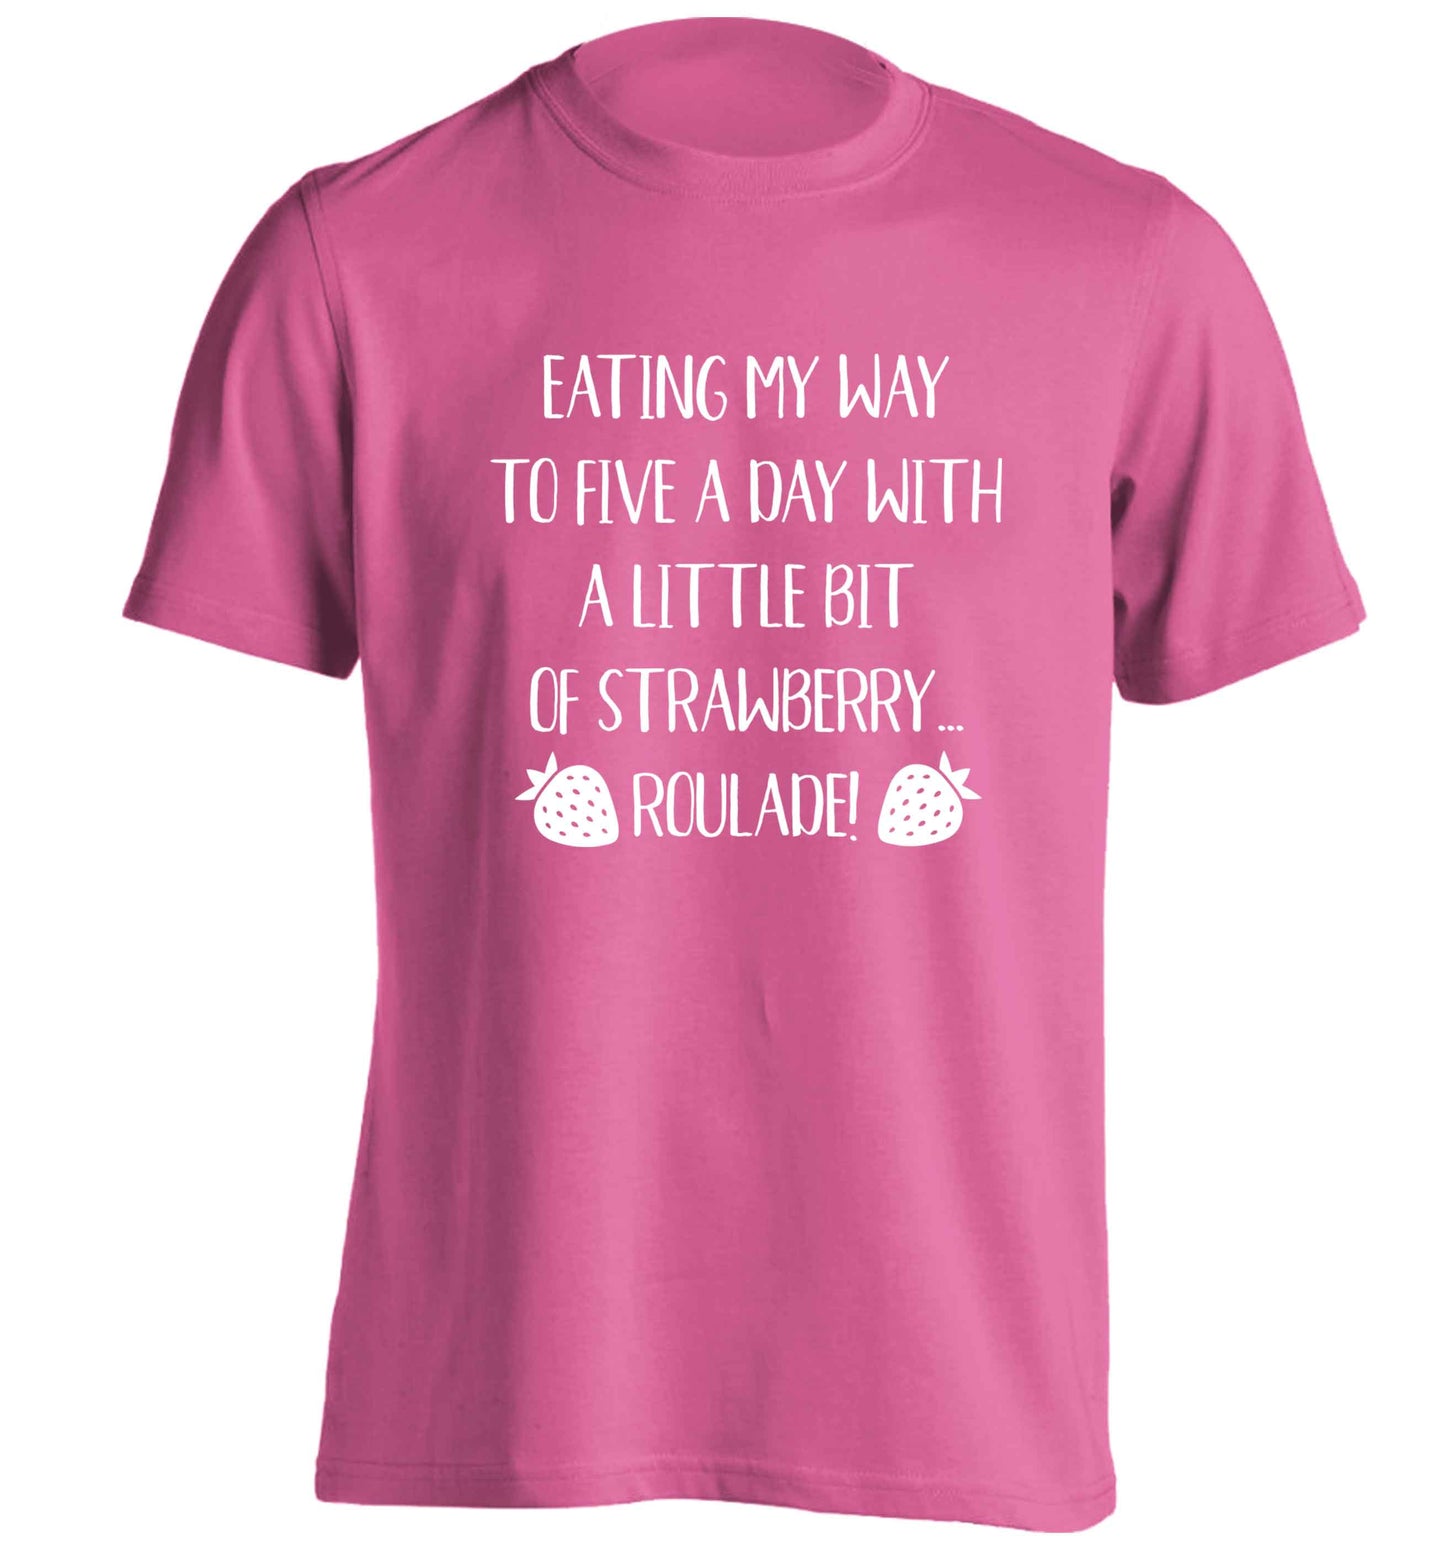 Eating my way to five a day with a little bit of strawberry roulade adults unisex pink Tshirt 2XL